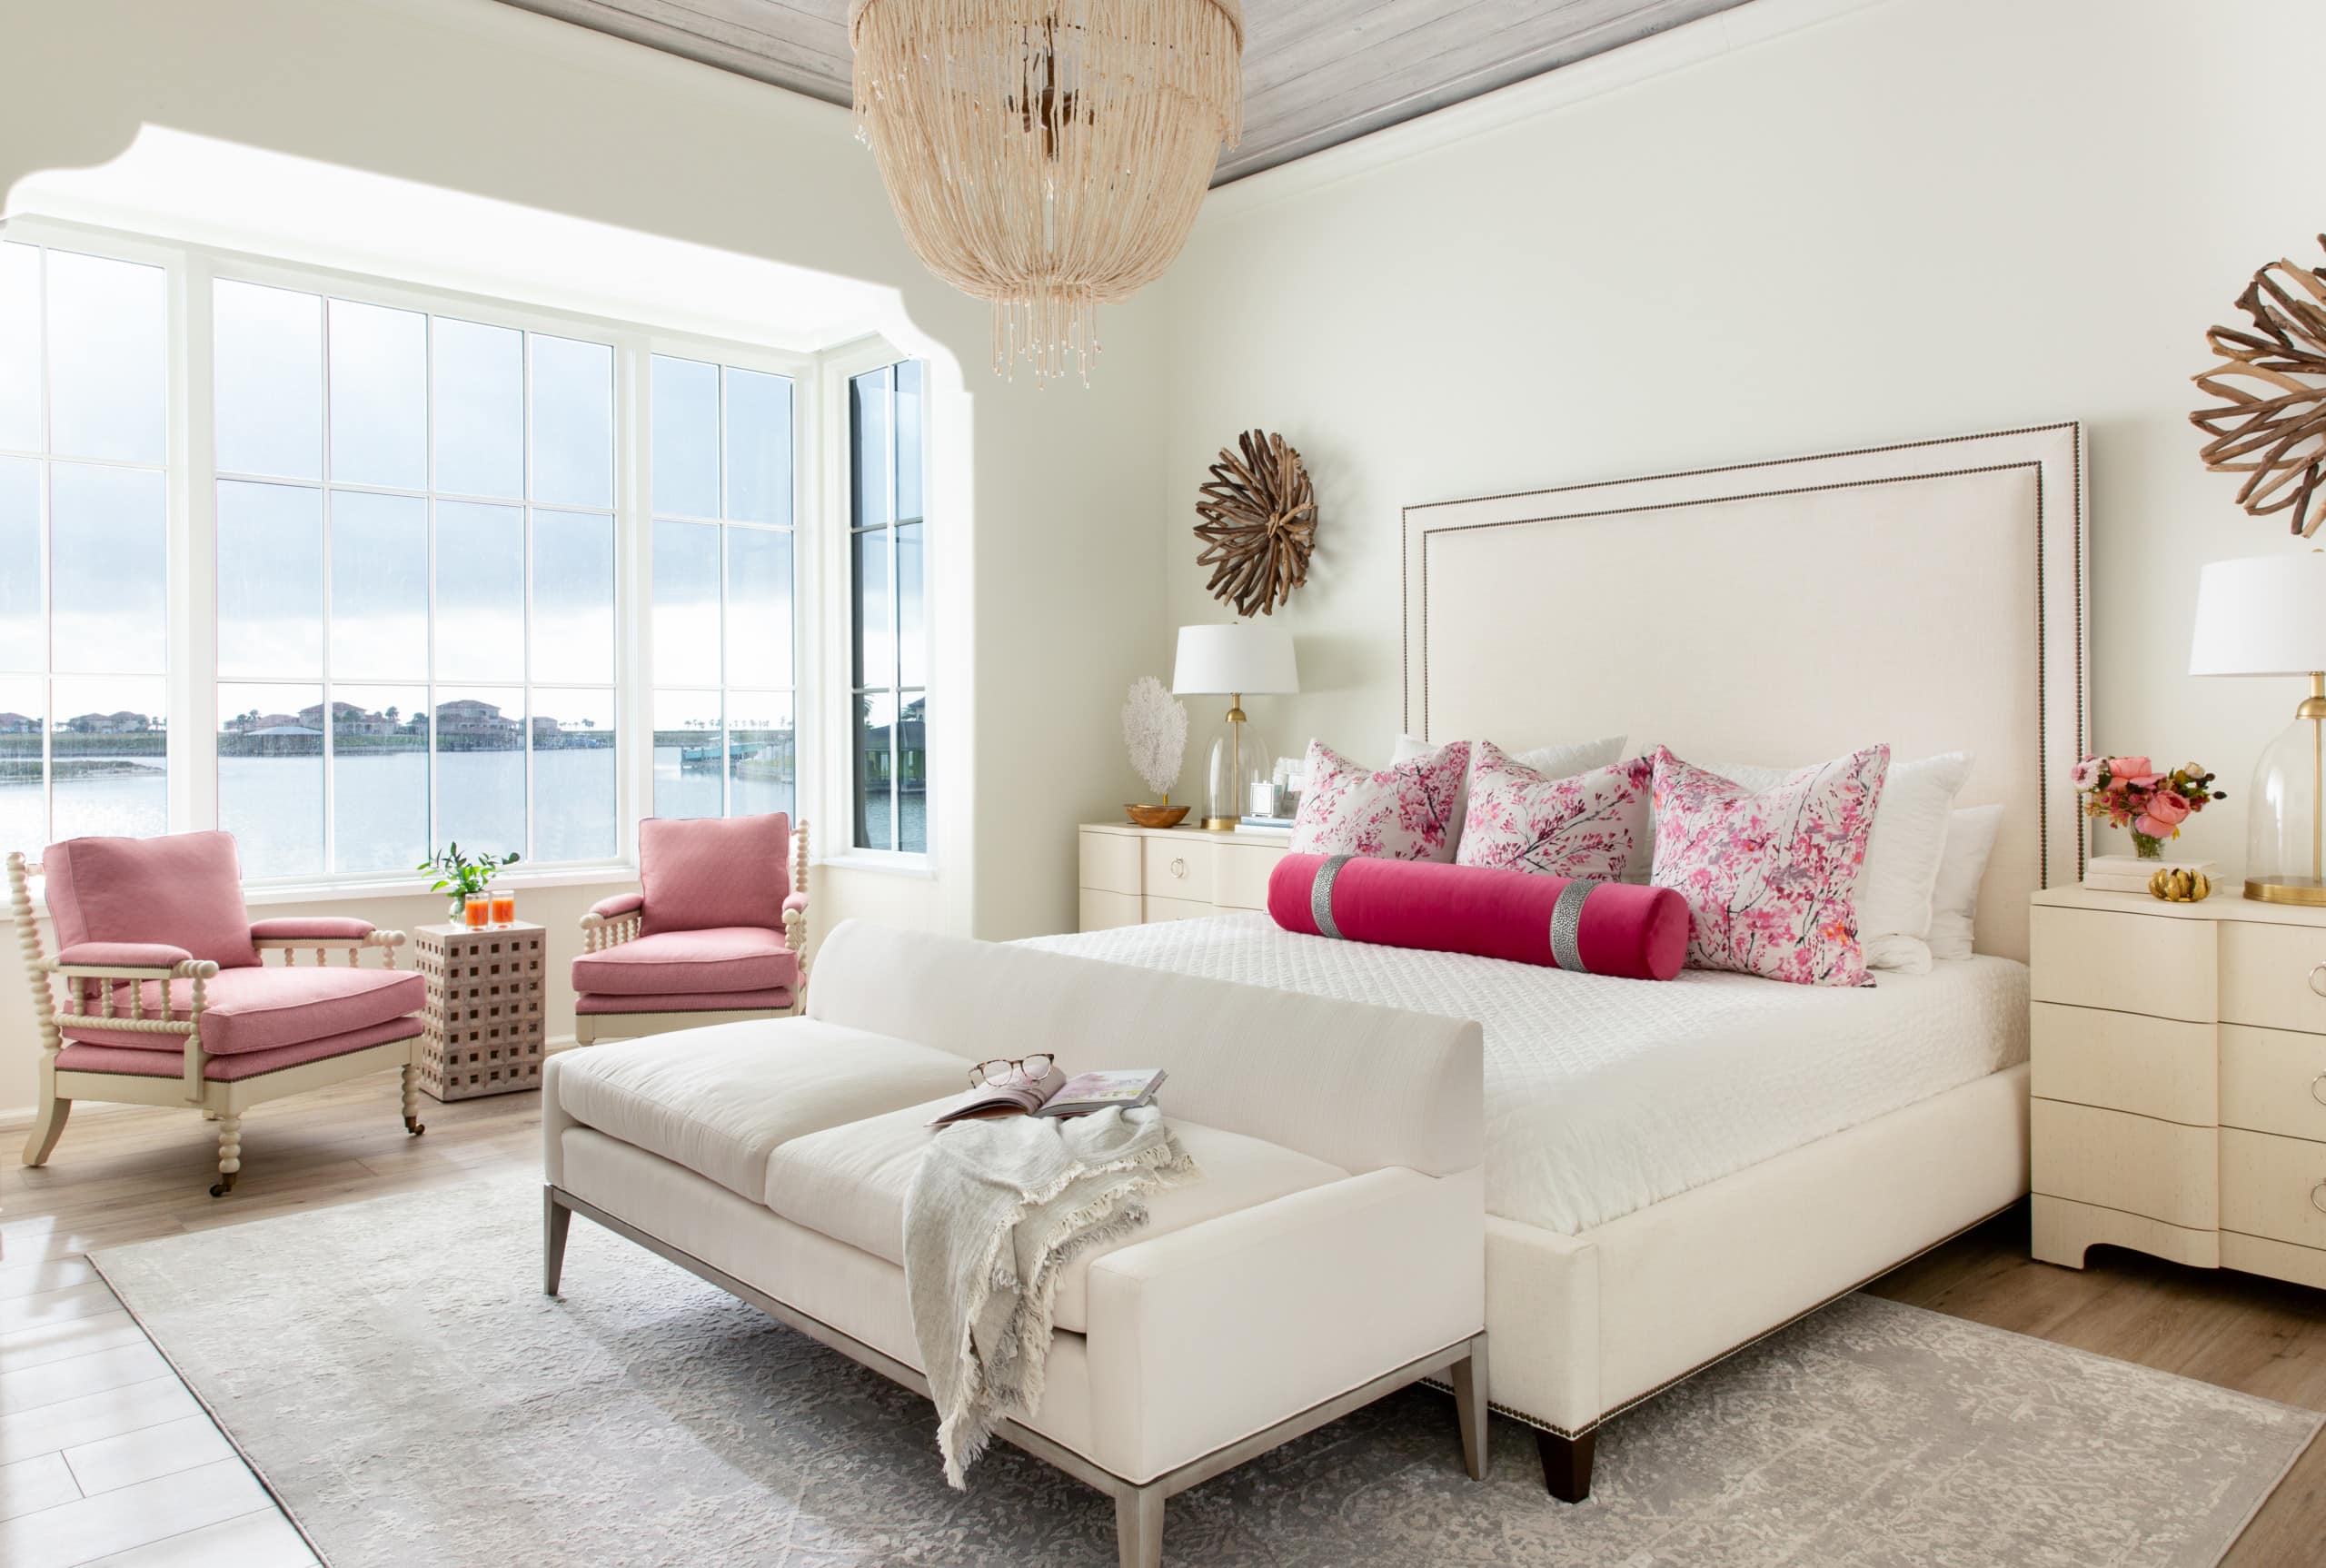 bedroom in coastal inspired decor featuring pink accents